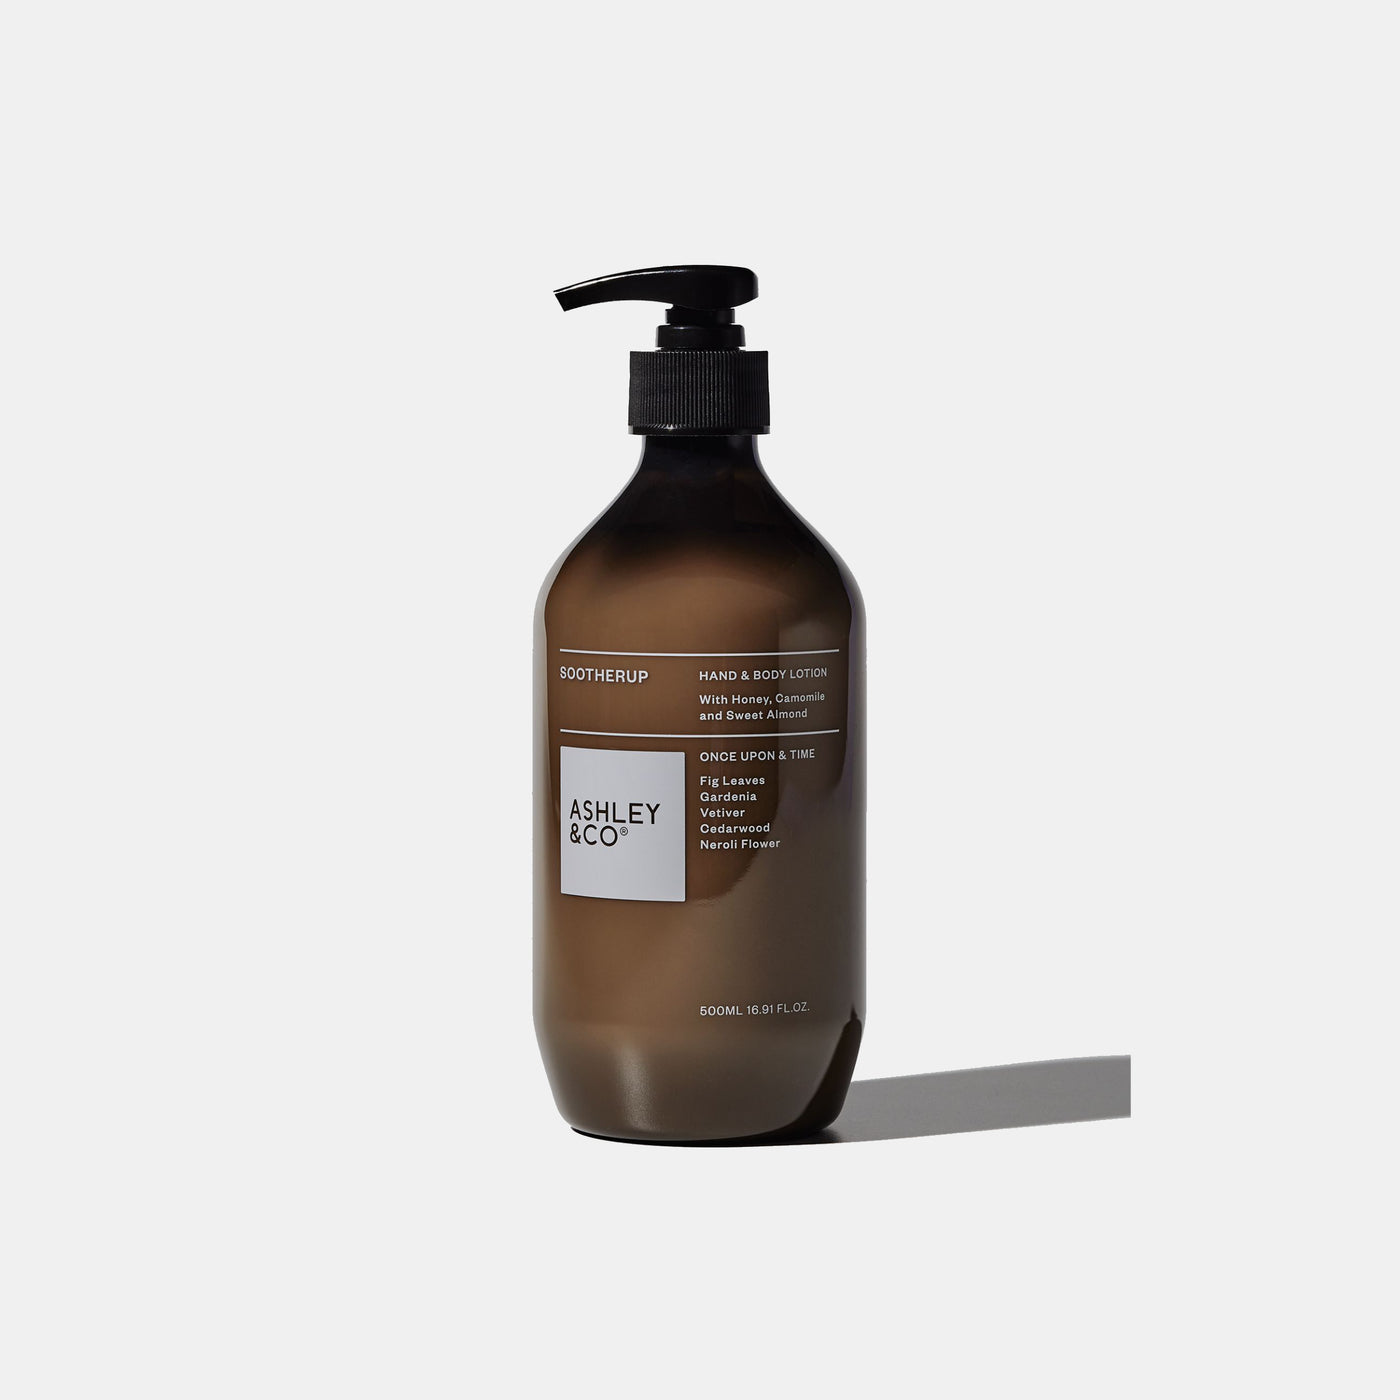 Sootherup - Once Upon & Time 500ml